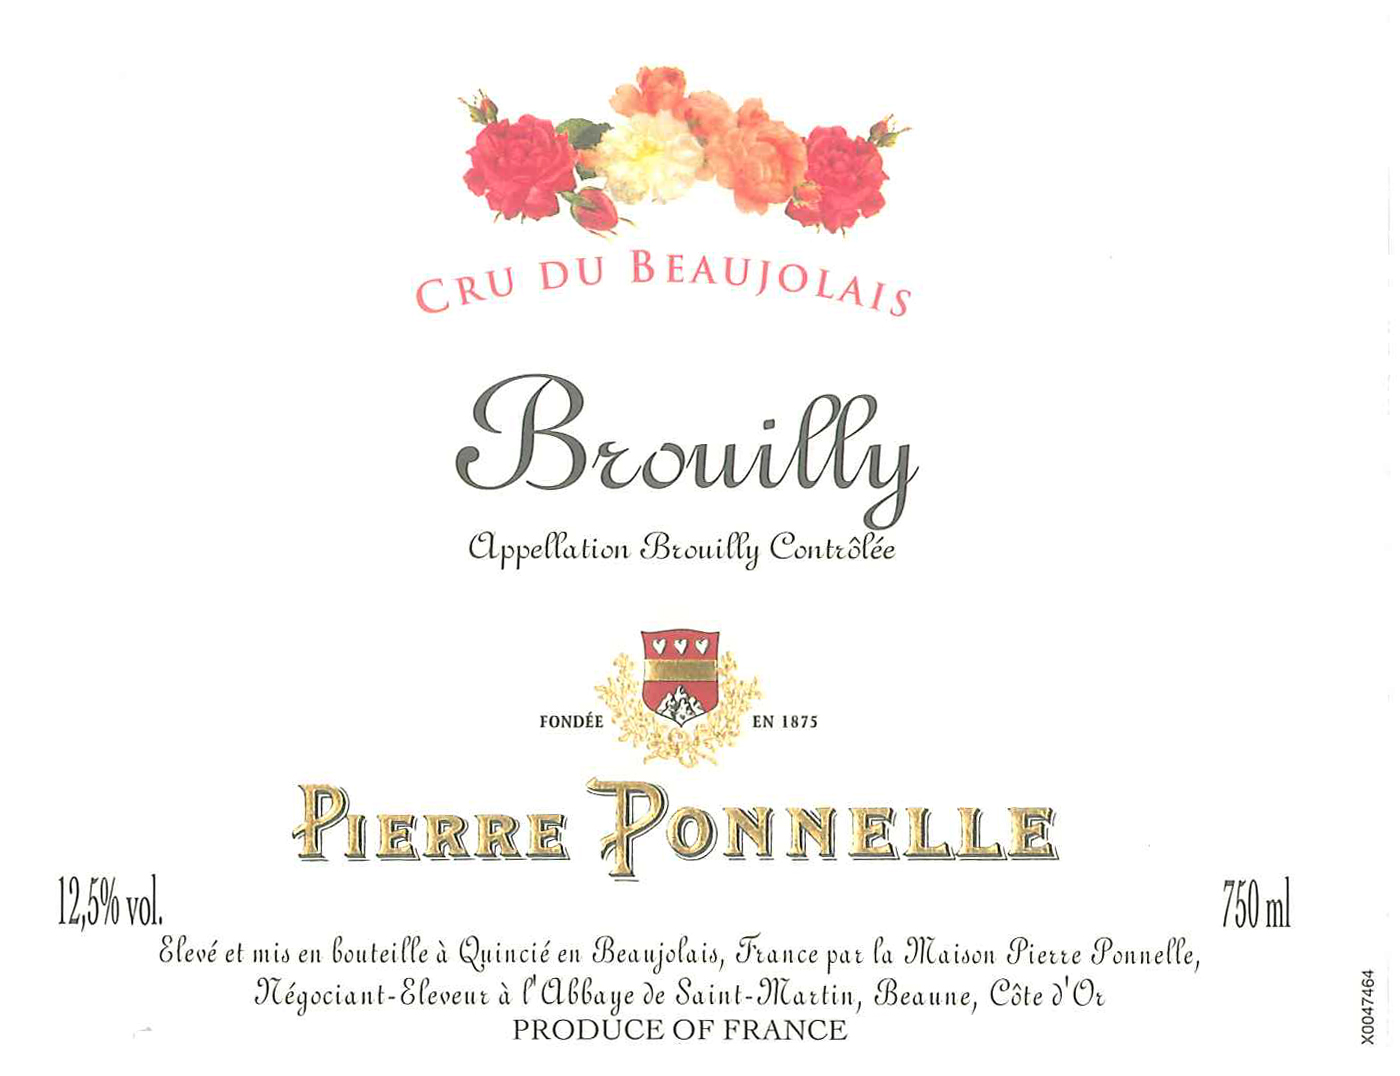 Brouilly